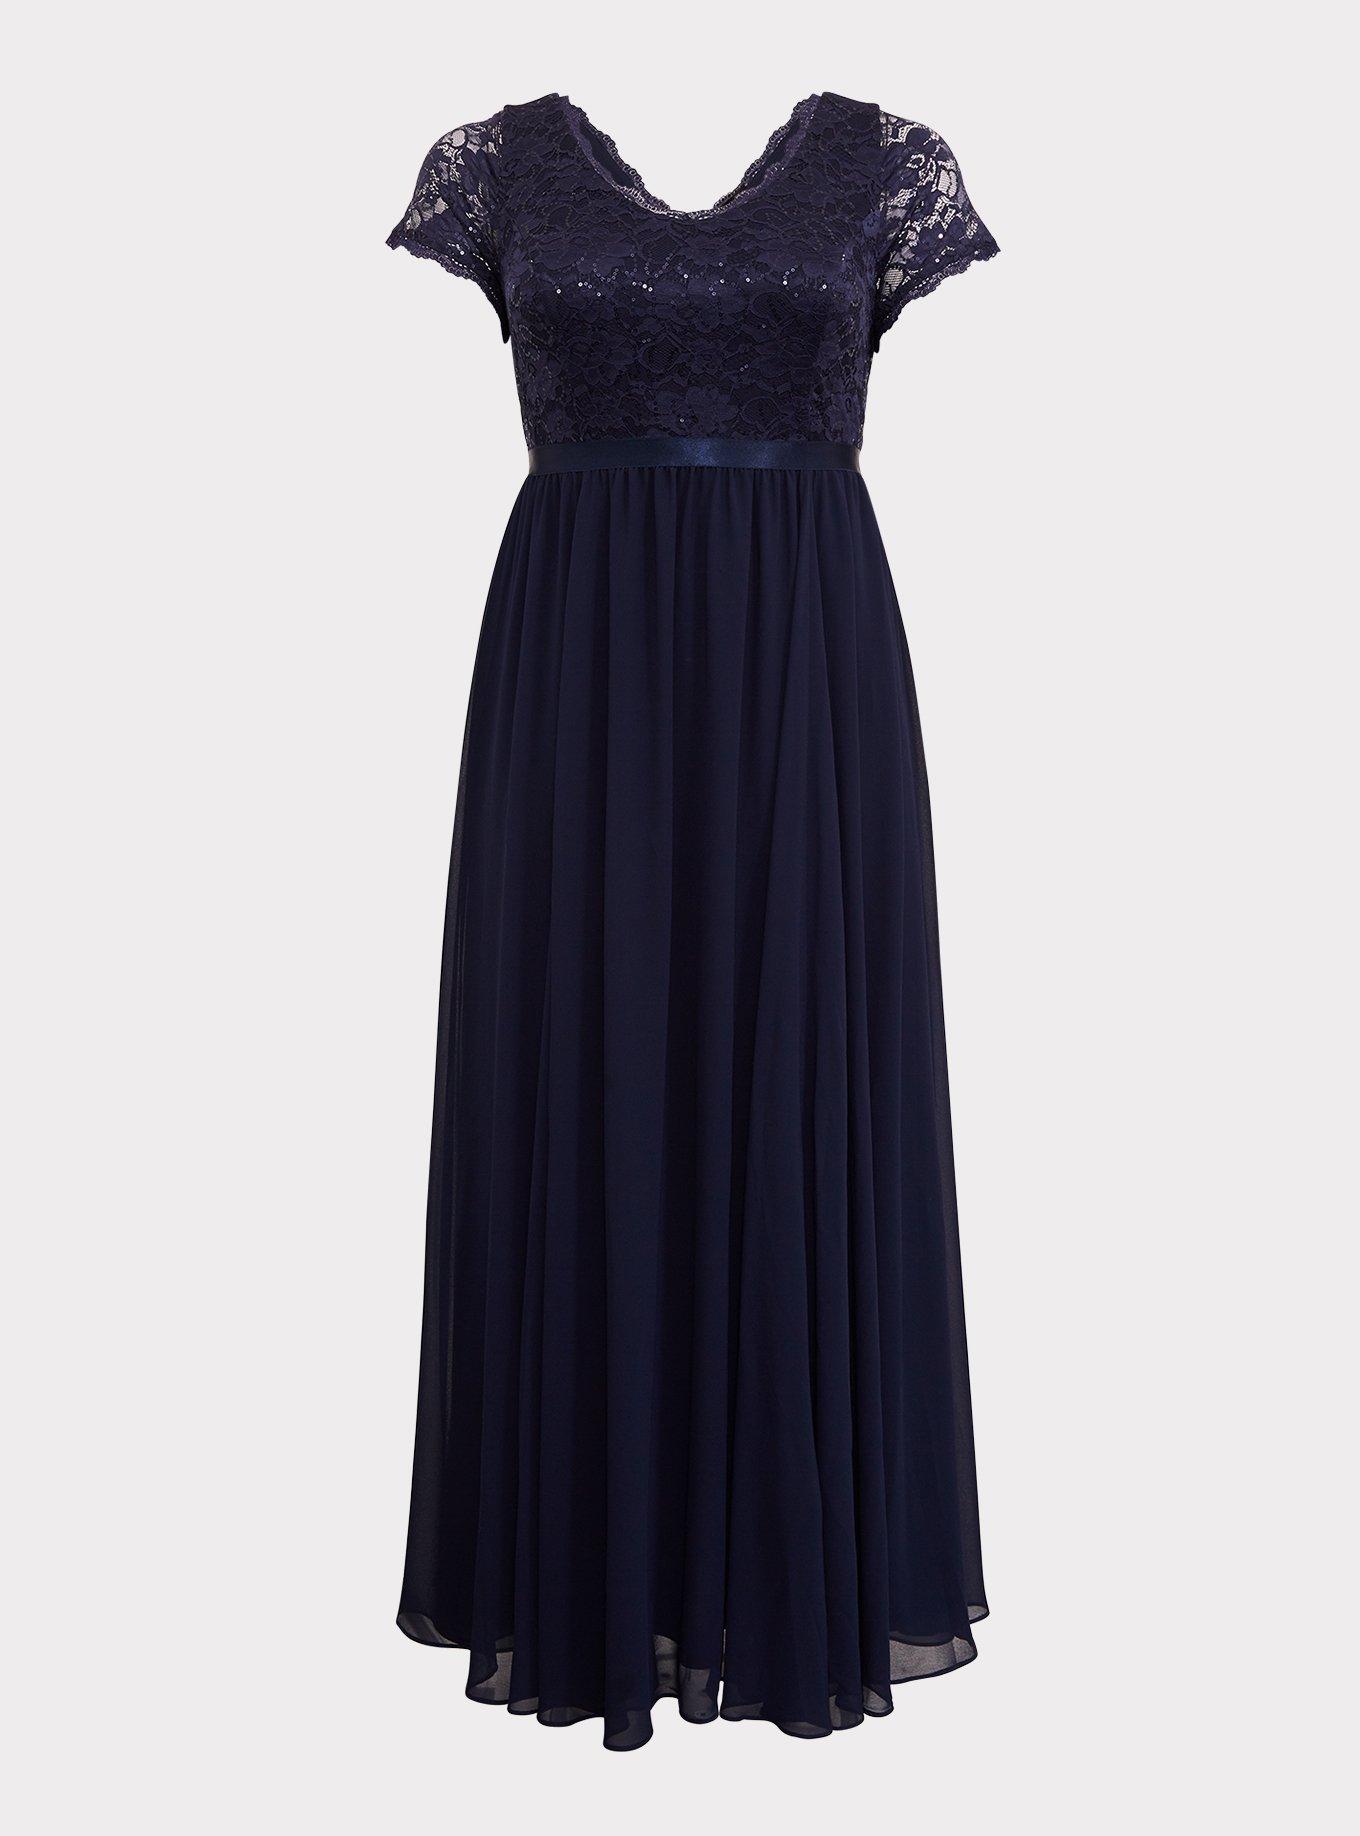 Plus Size - Special Occasion Navy Sequin & Lace Chiffon Gown - Torrid